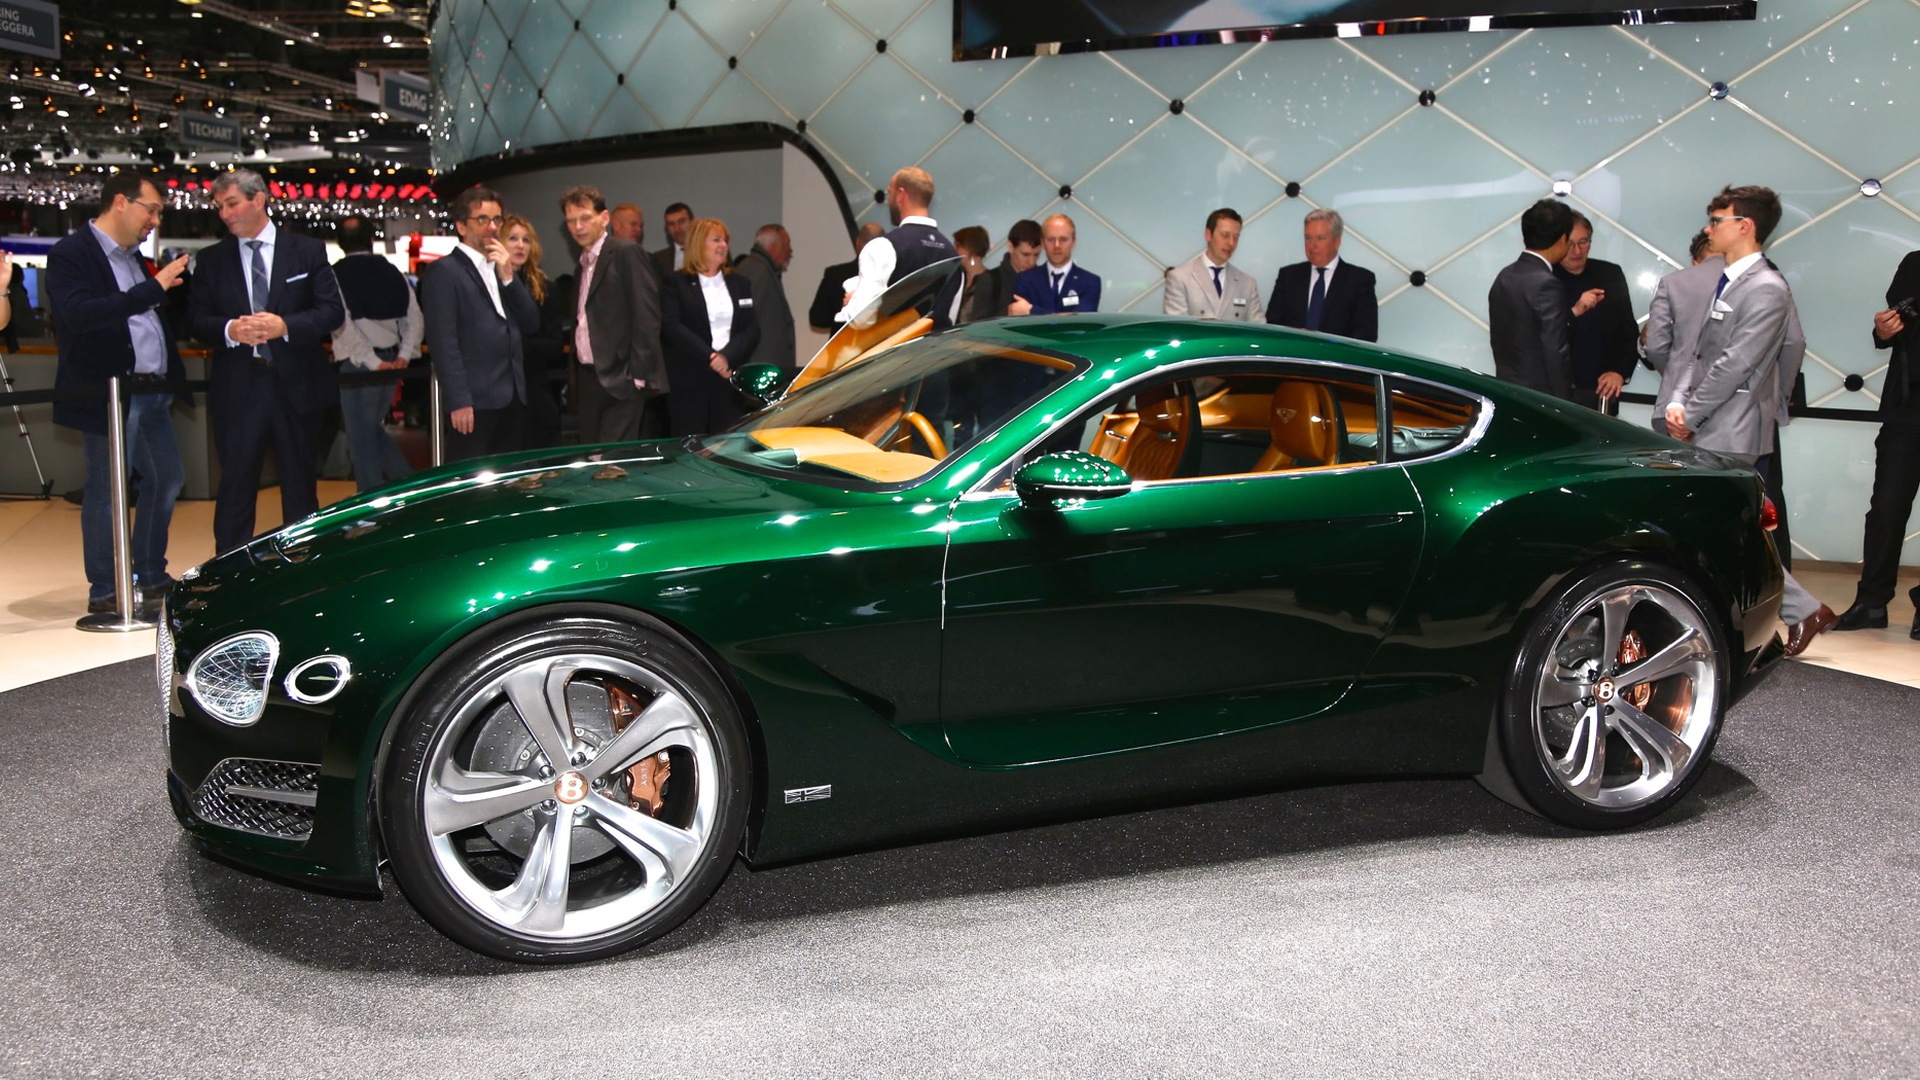 New Exp 10 Speed 6 Concept Hints At Potential Bentley Sports Car Live Photos And Video